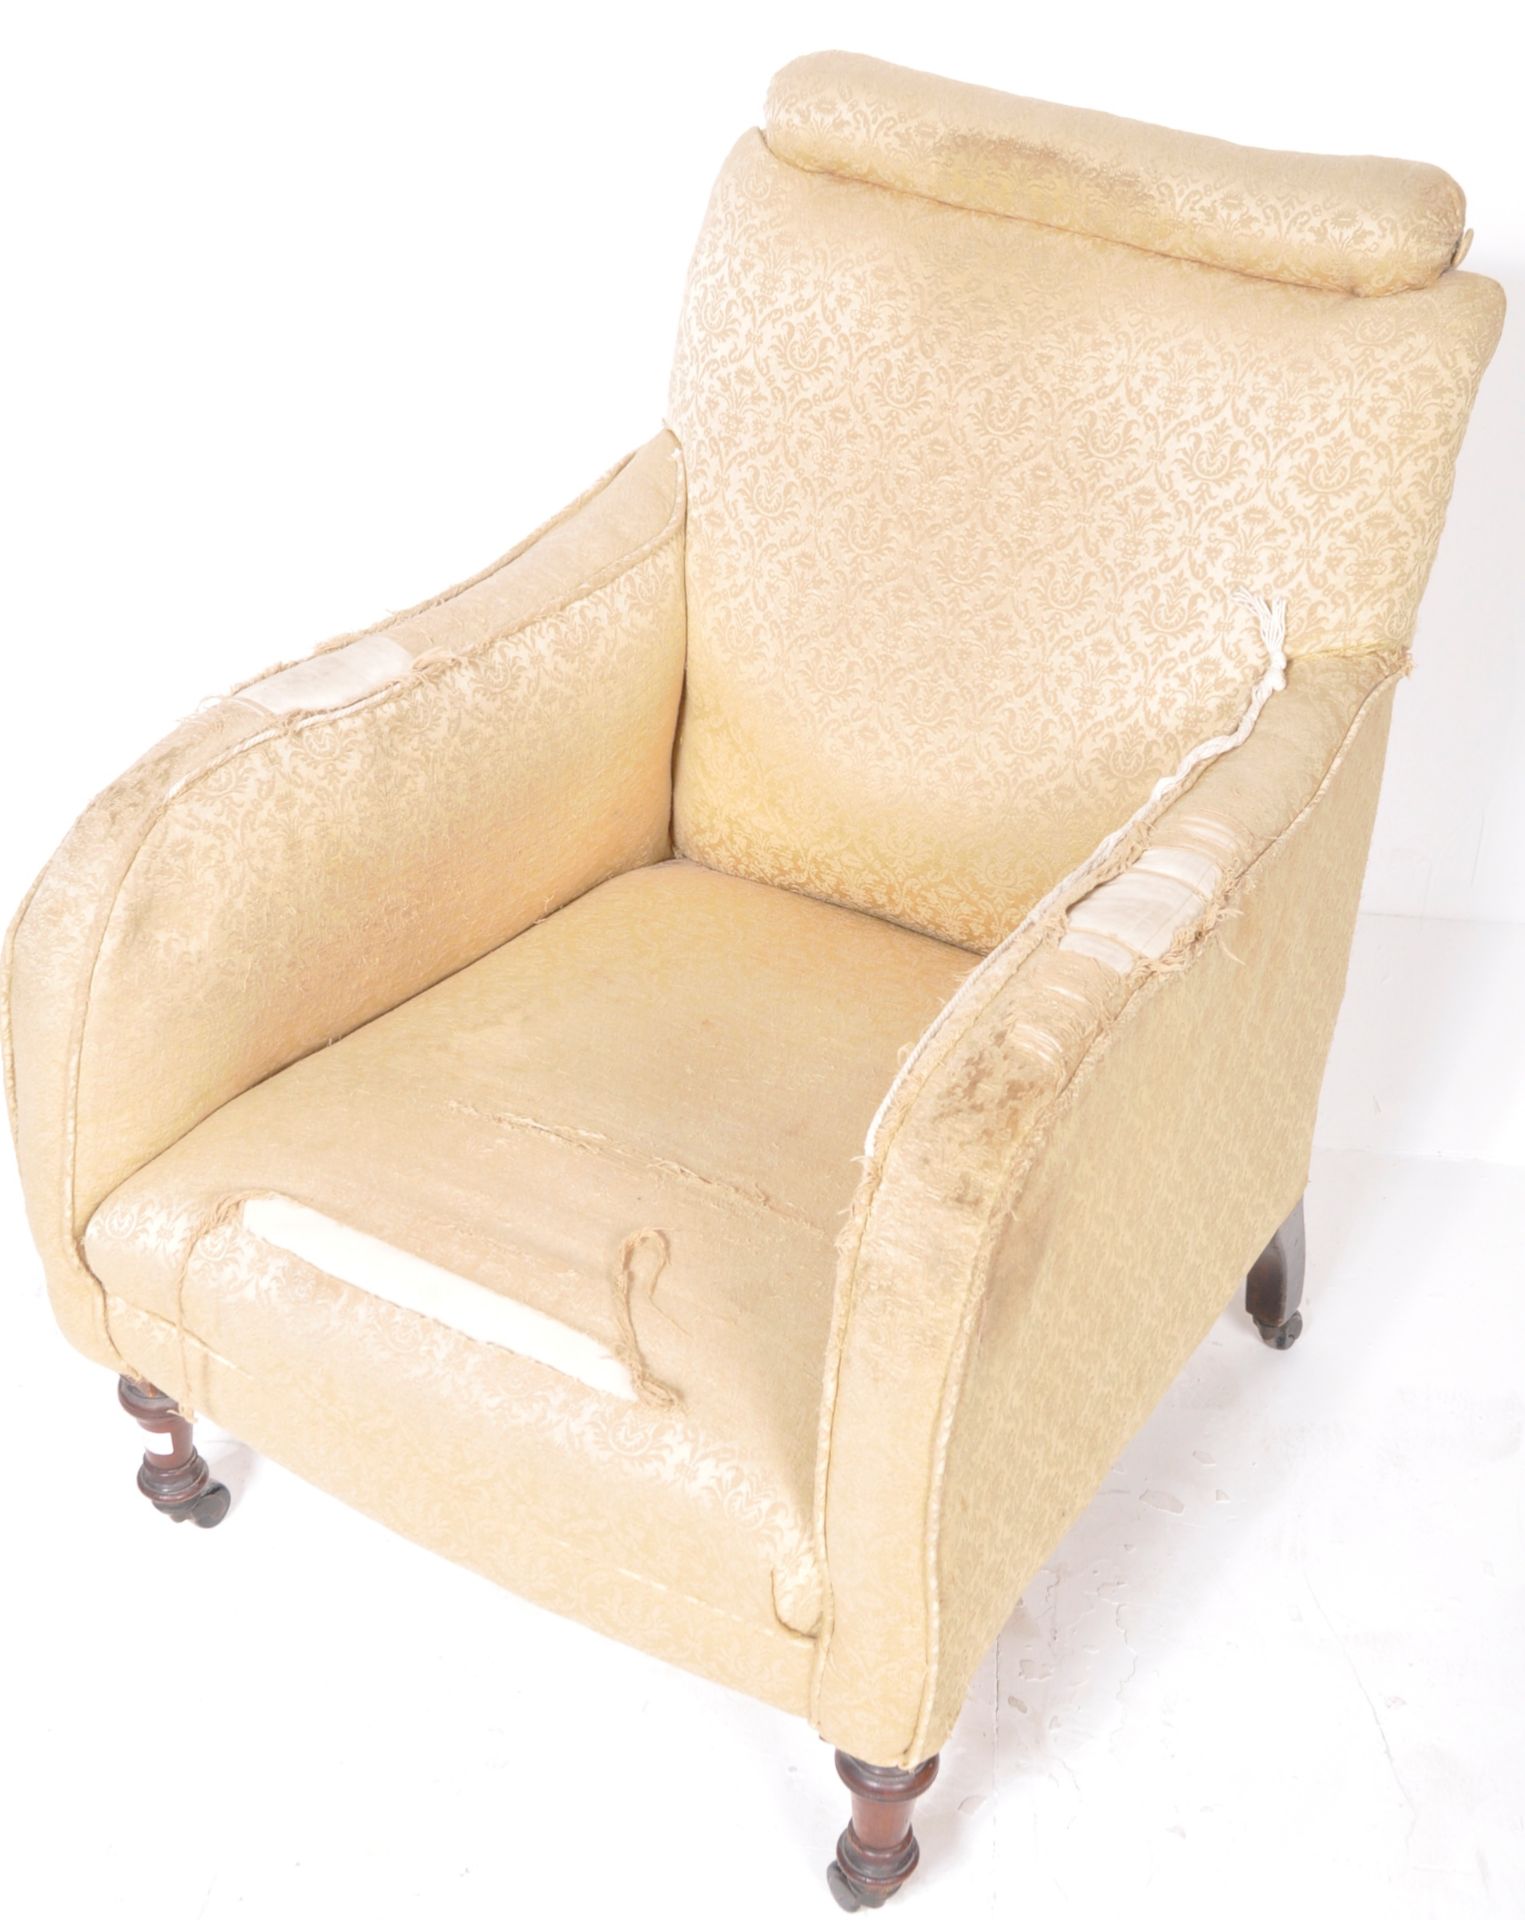 19TH CENTURY VICTORIAN PADDED ARMCHAIR - Image 2 of 8